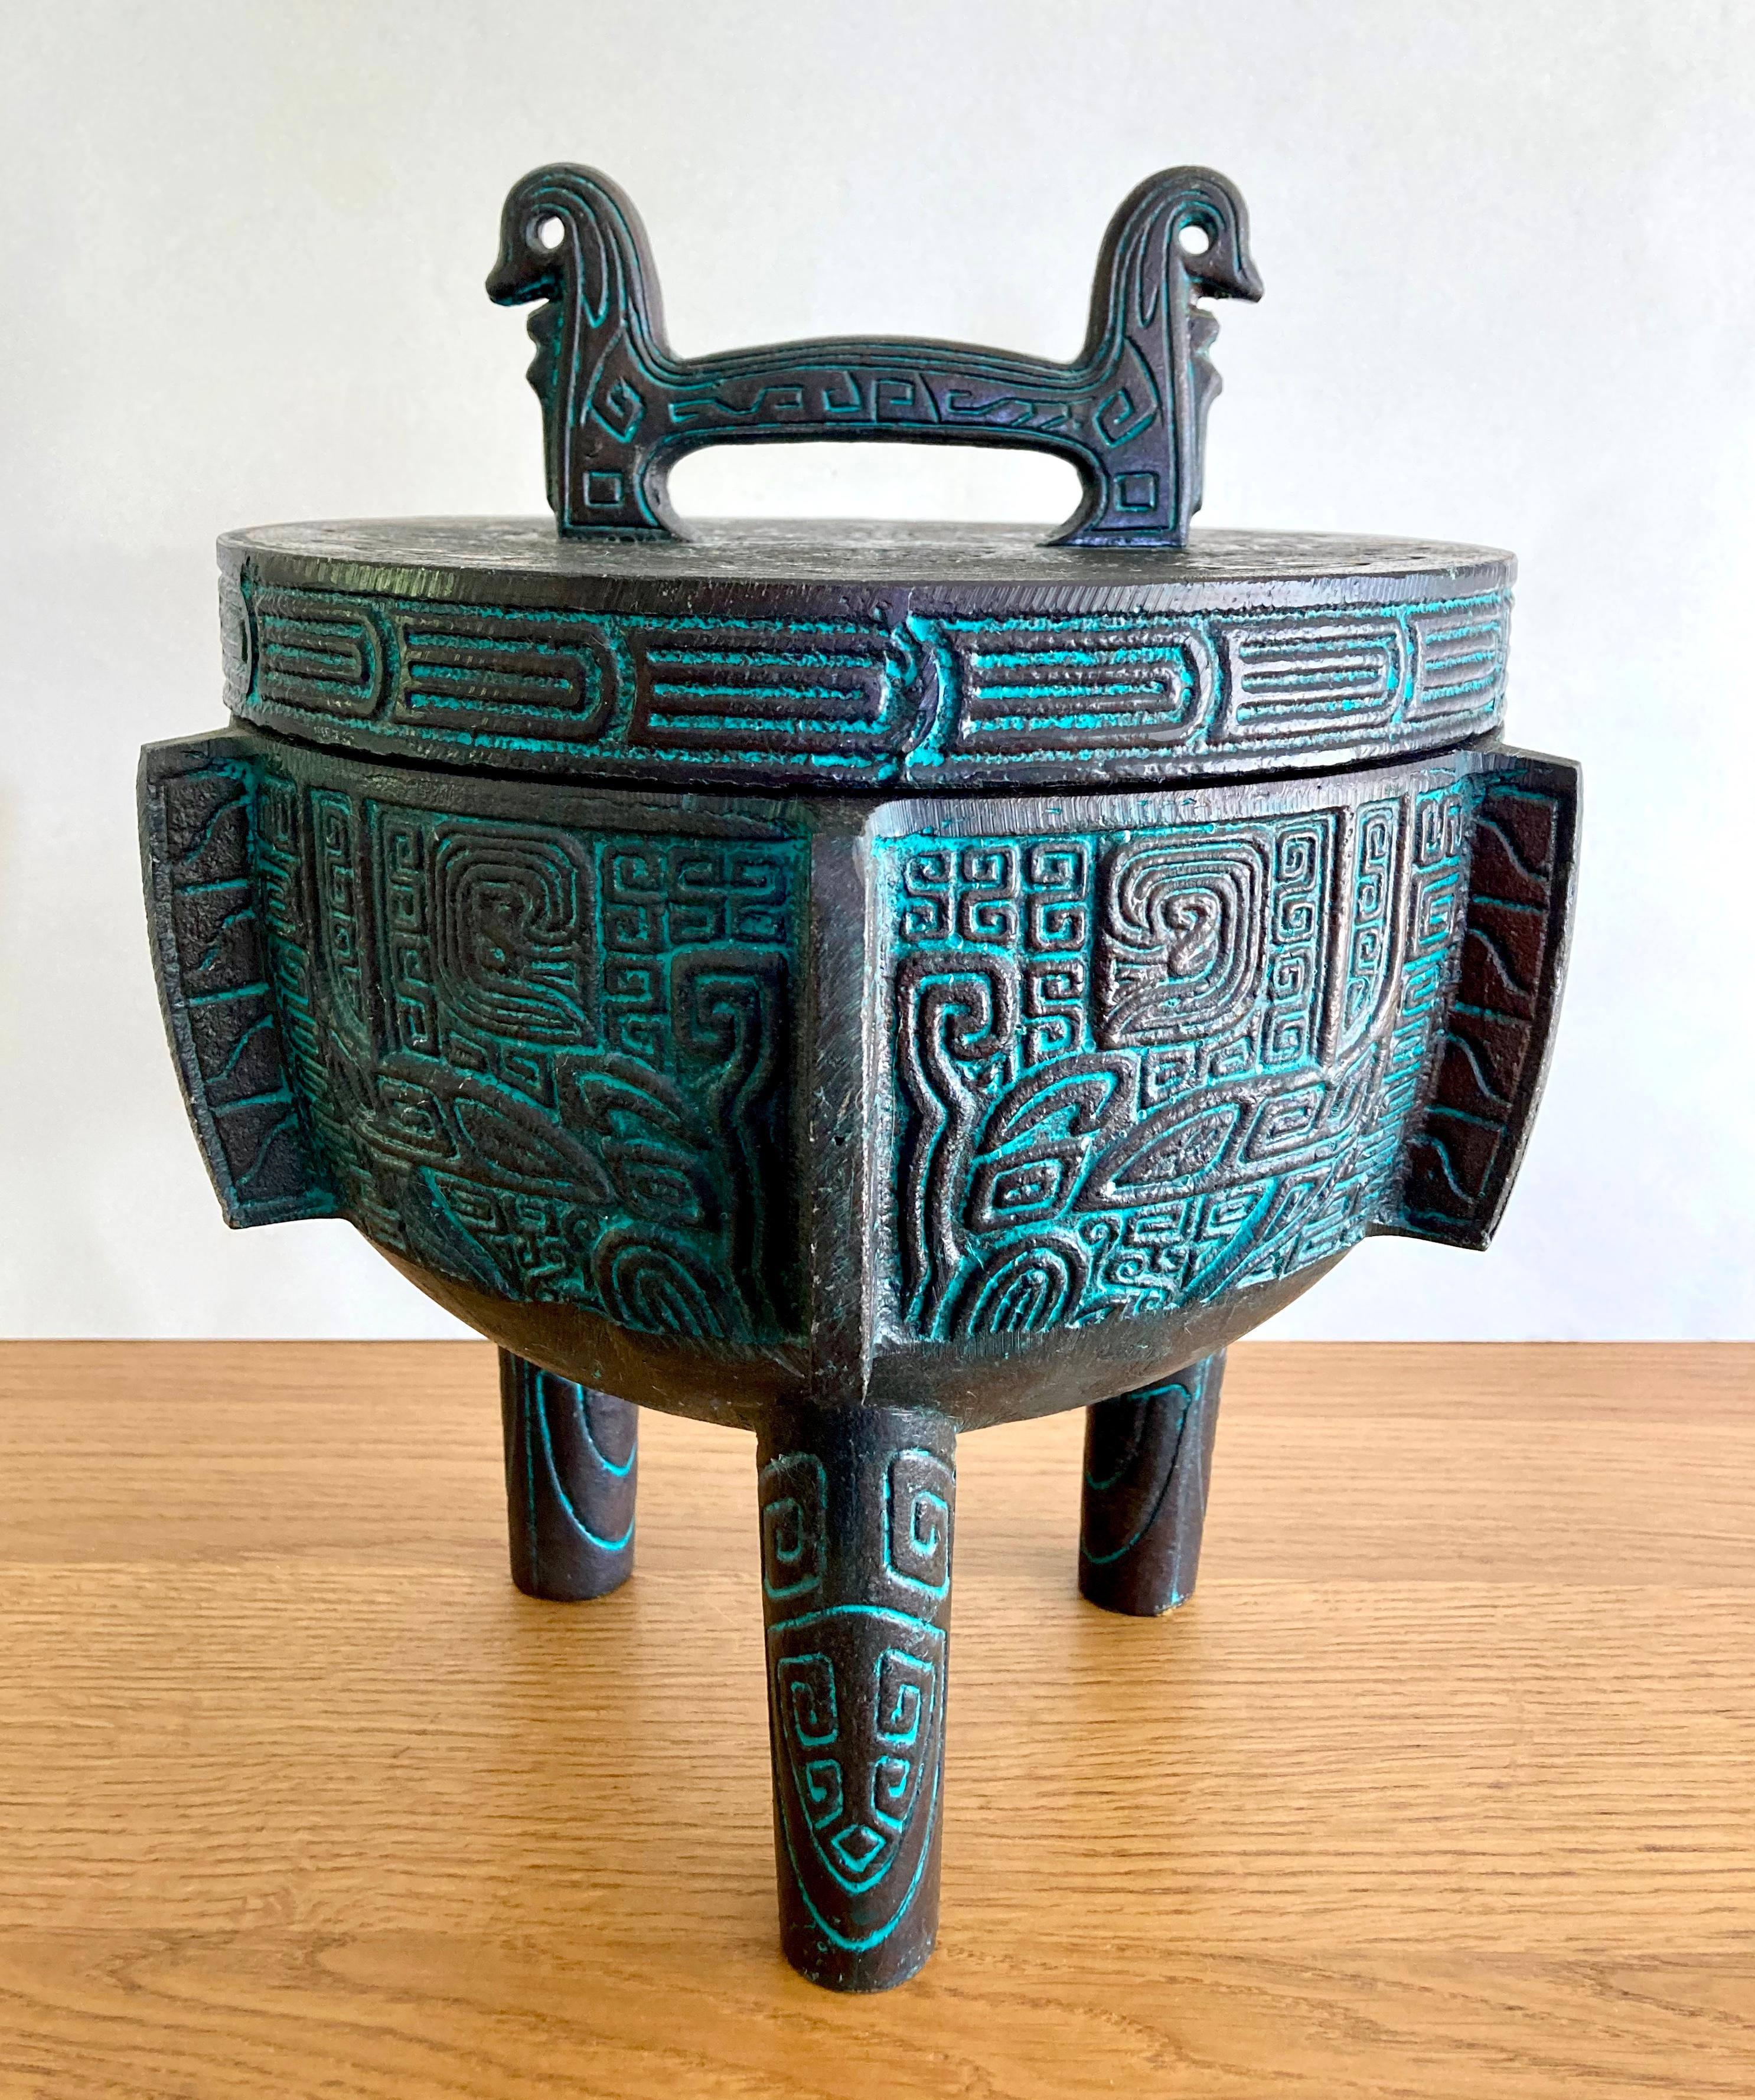 A mid-century modern design icon: the desirable ice bucket by American designer James Mont made in the 1960s. Due to its ethnic design and elaborate, exotic relief pattern, this model is often referred to as his Burmese ice bucket. The bucket is